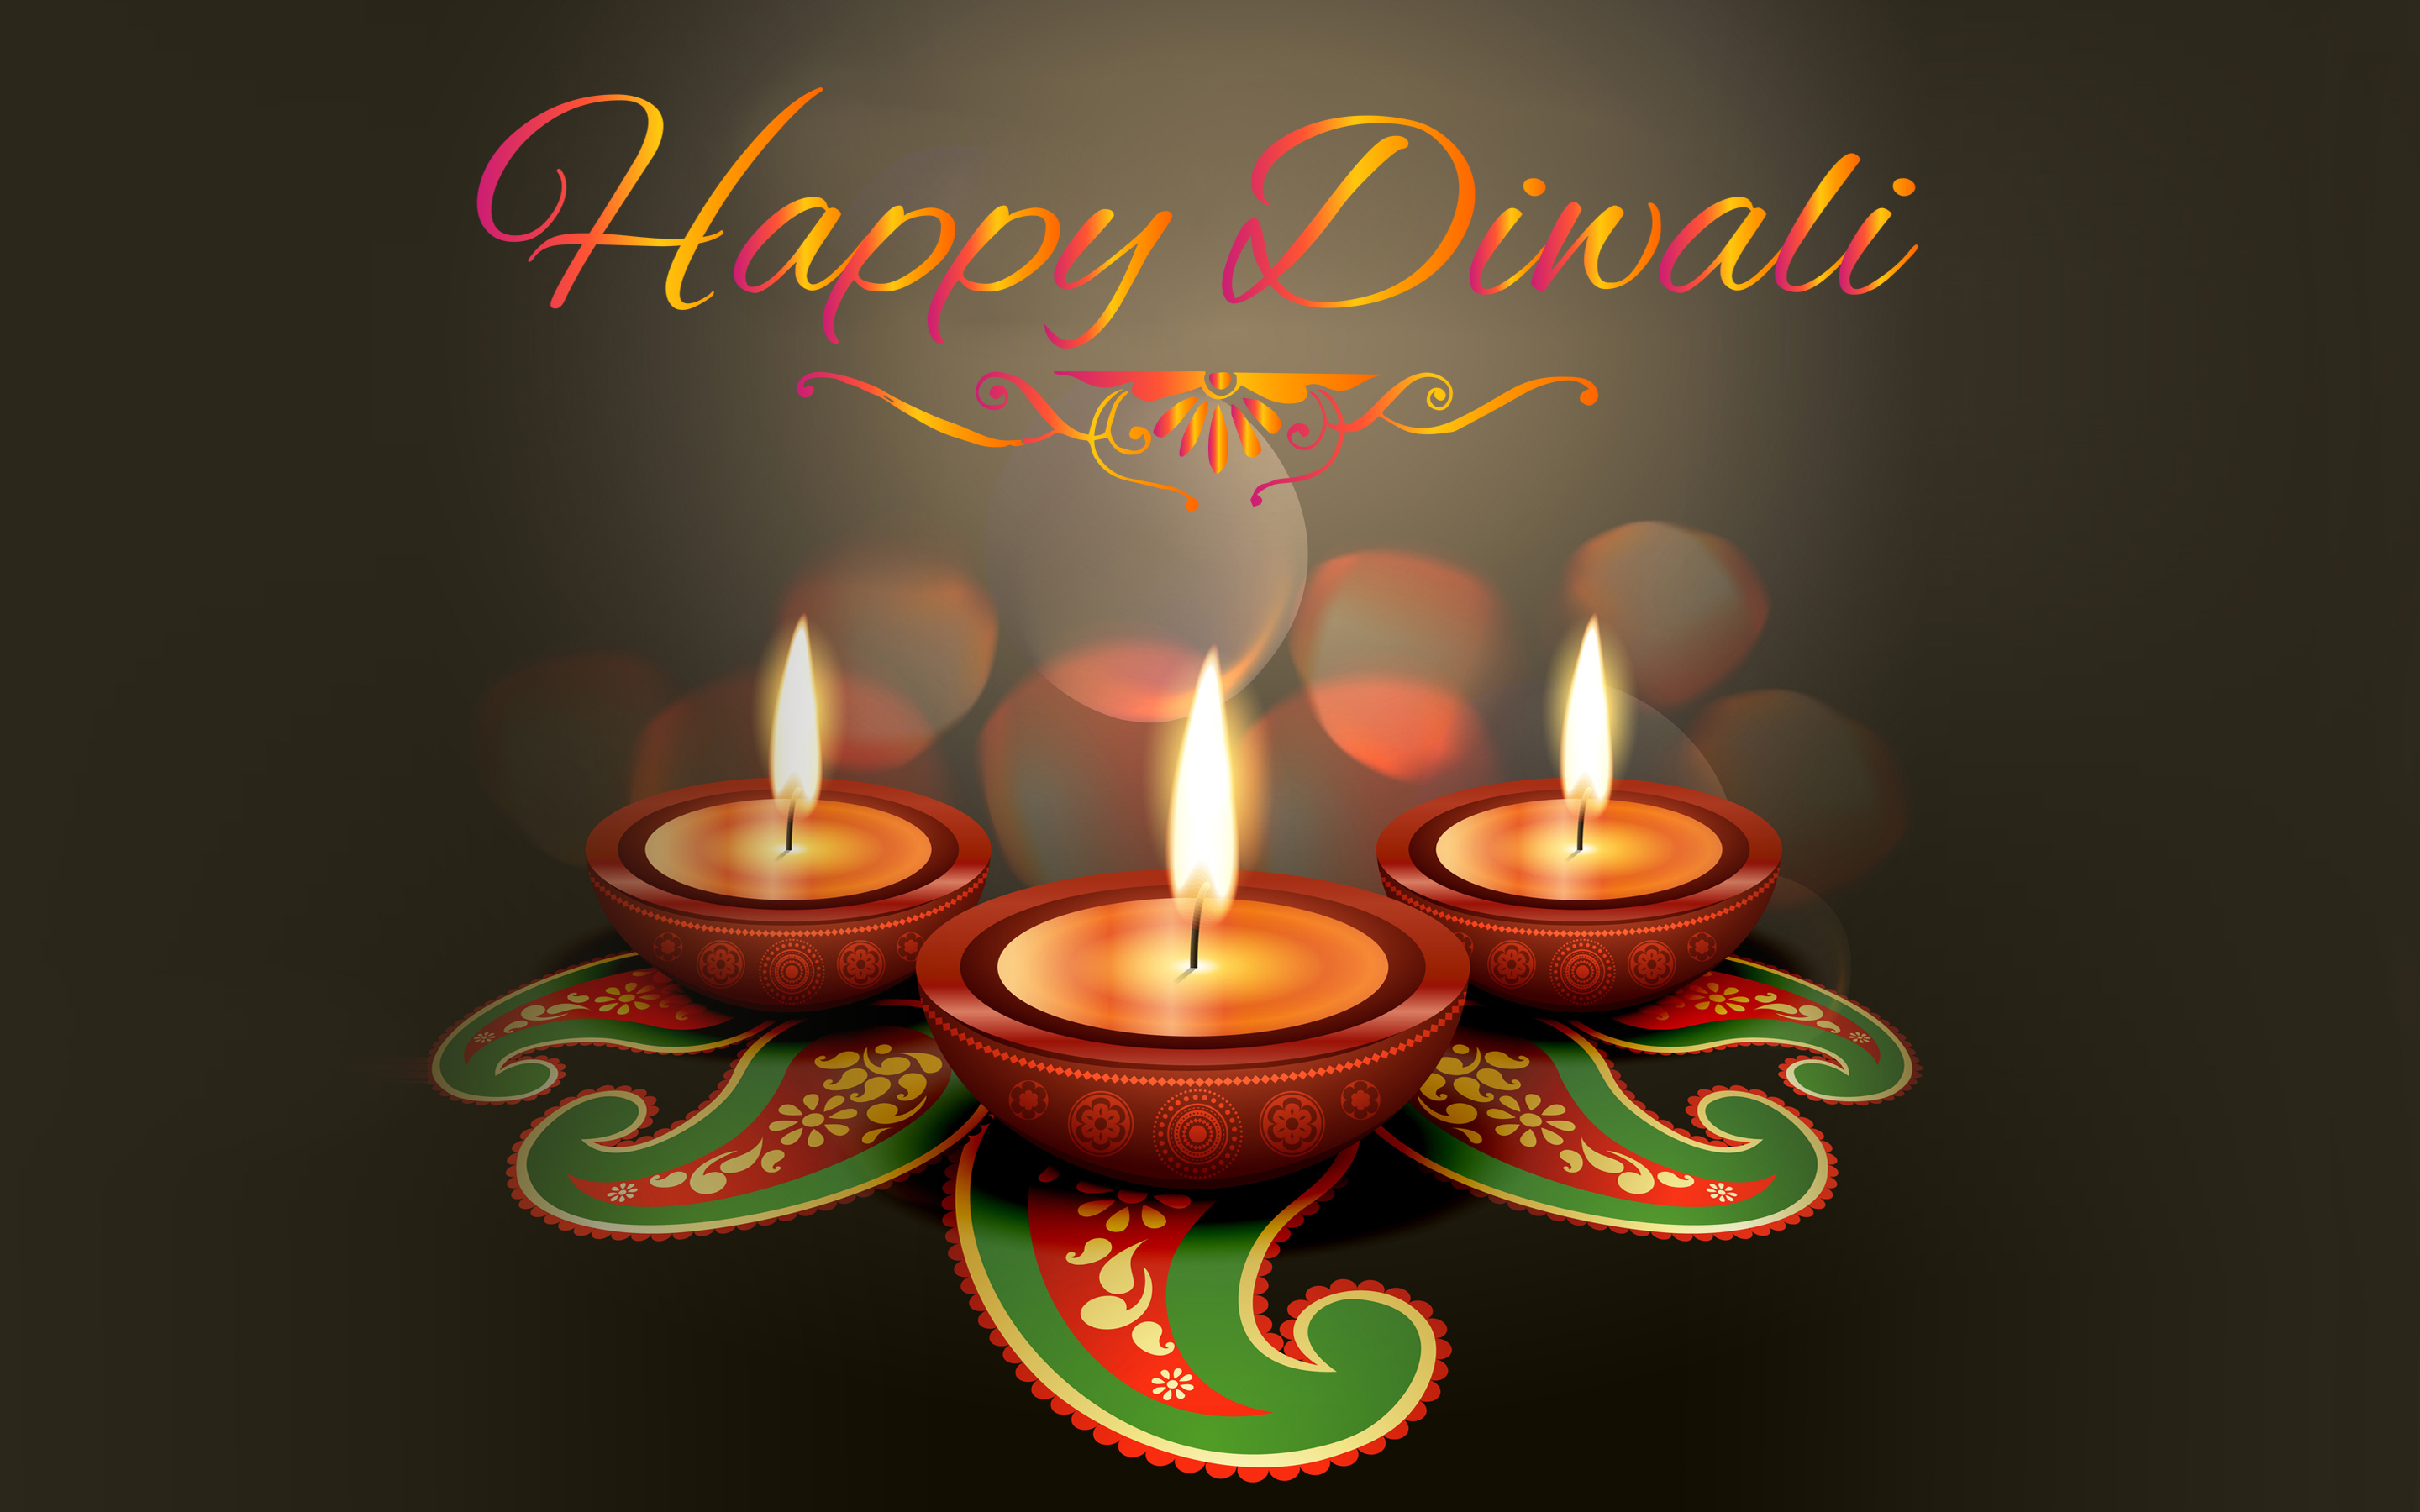 Happy Diwali 2022 Quotes Wishes Greetings Images HD Wallpapers 1920x1080 :  